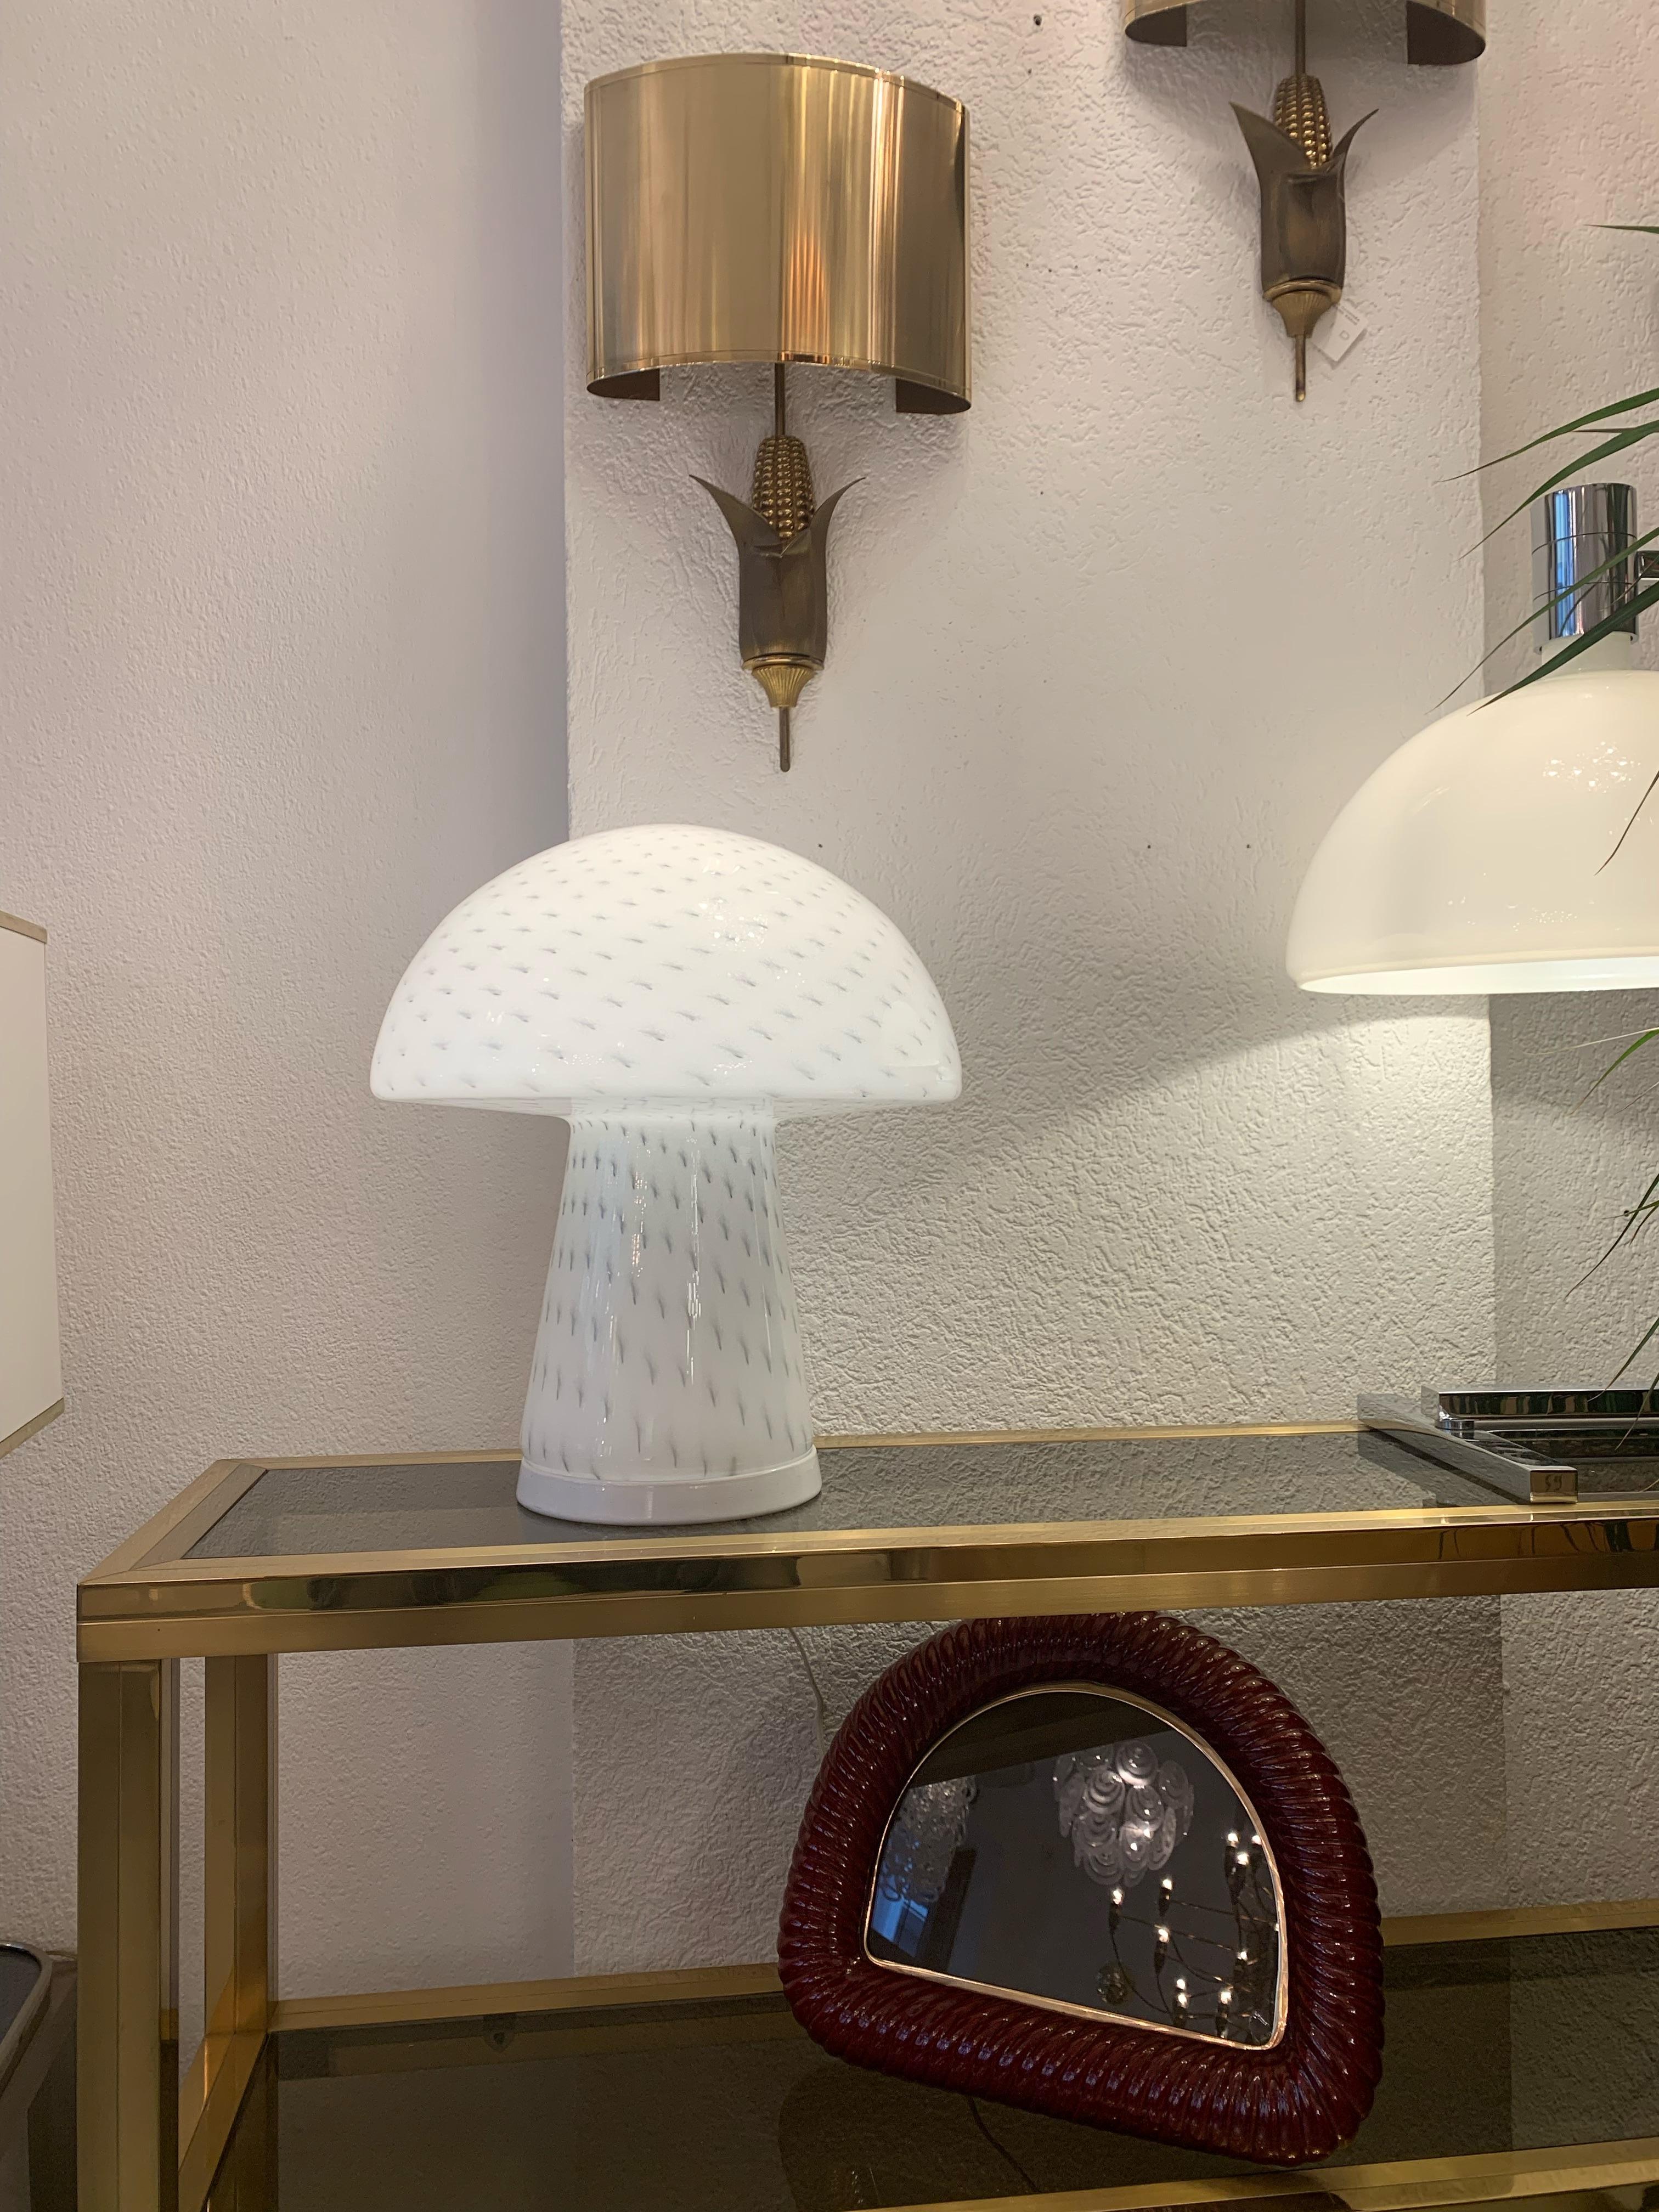 Glass mushroom table lamp produced by Zonca, Italy ca. 1970s
Perfect condition.